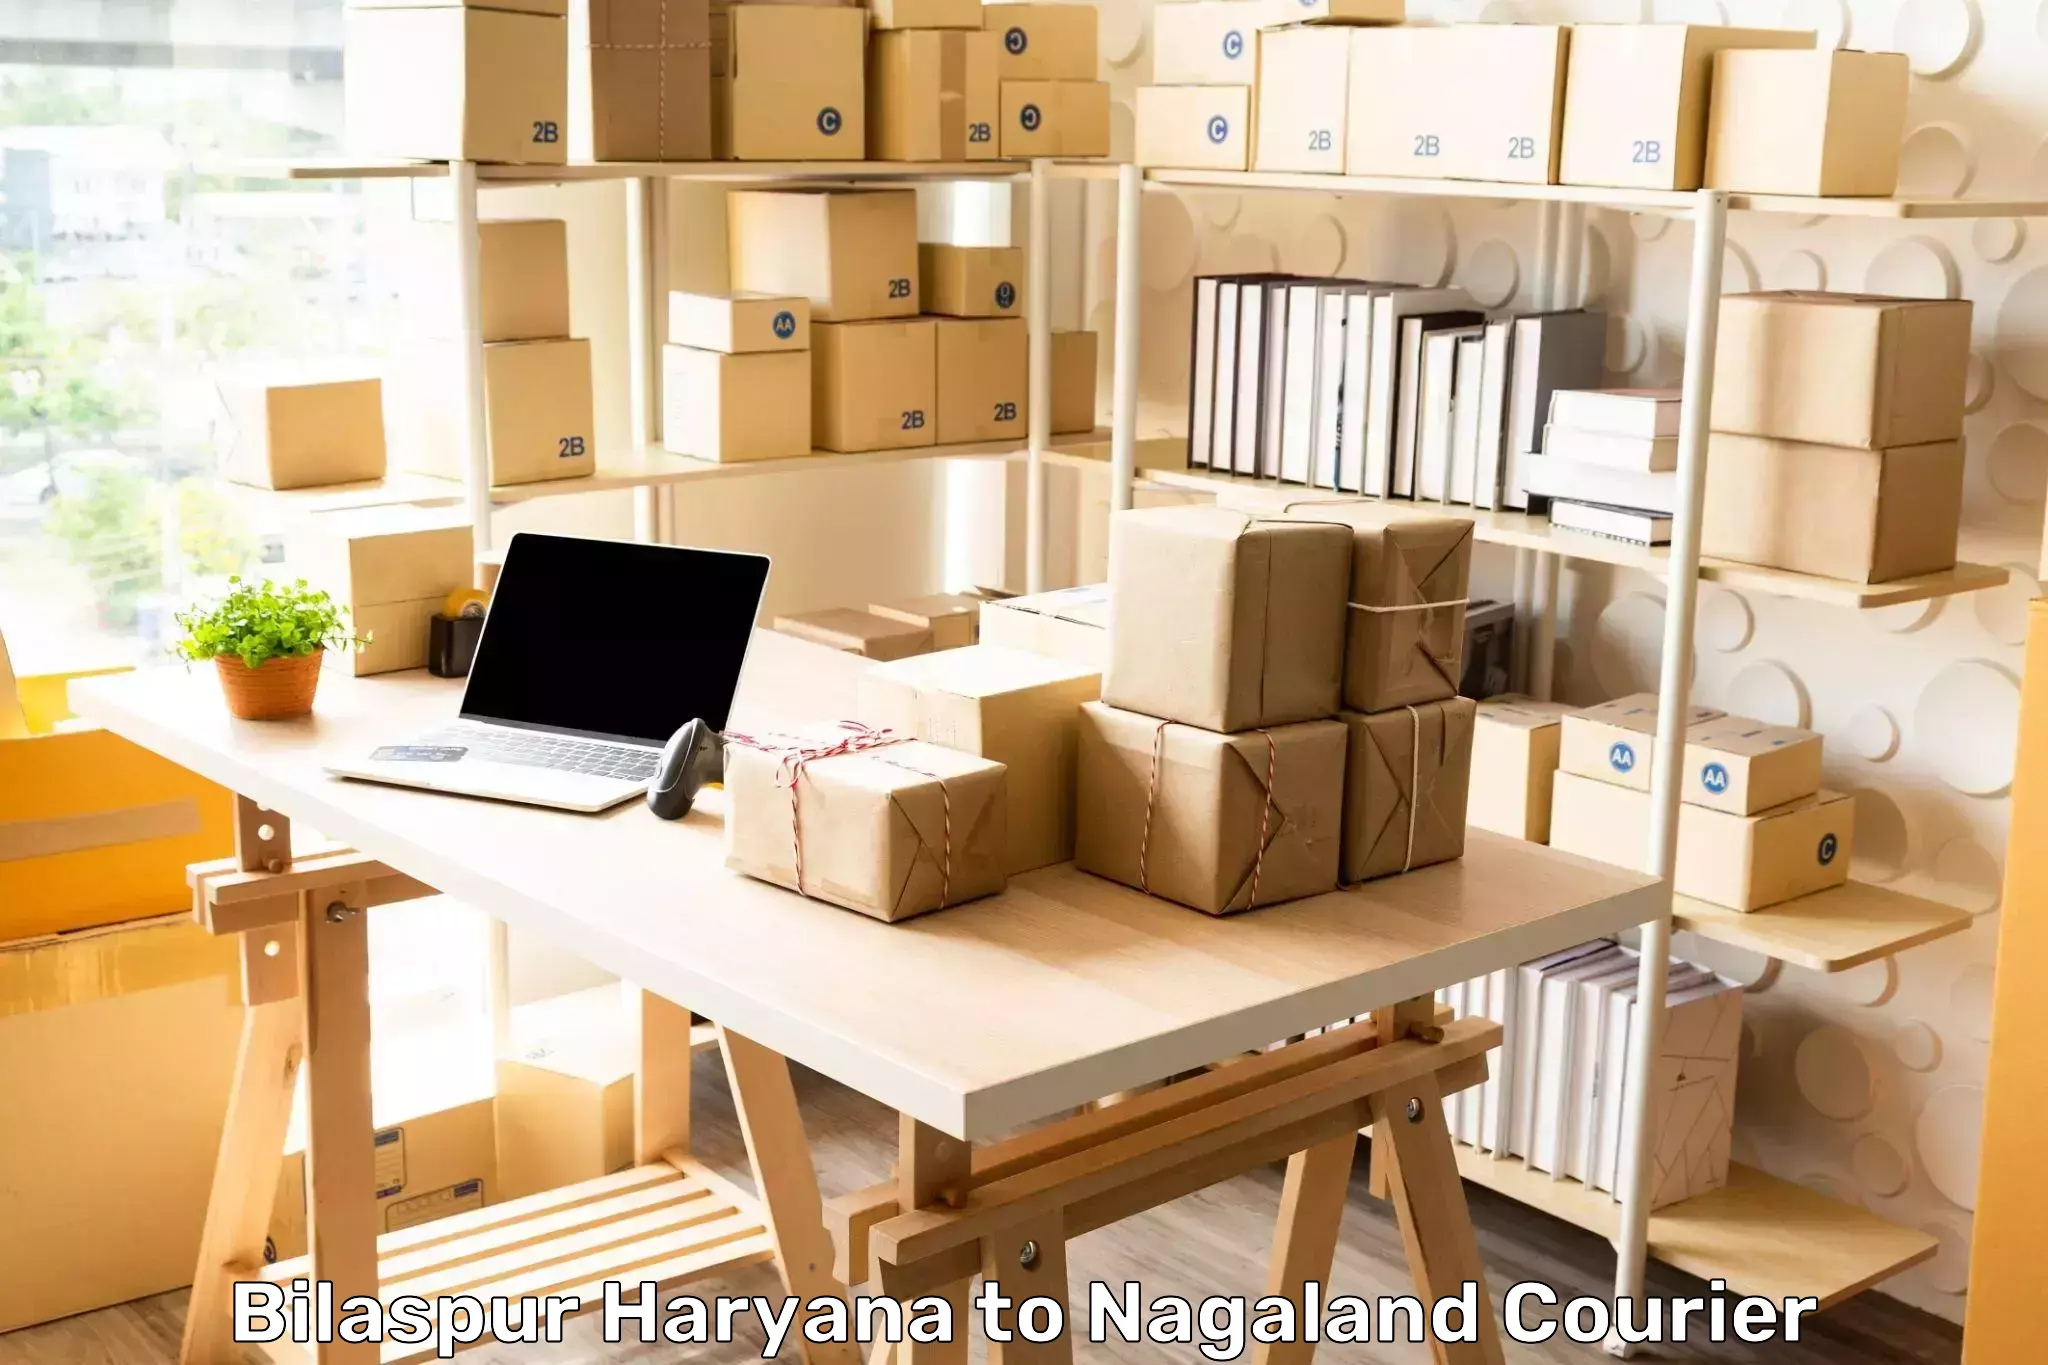 Residential courier service Bilaspur Haryana to Dimapur